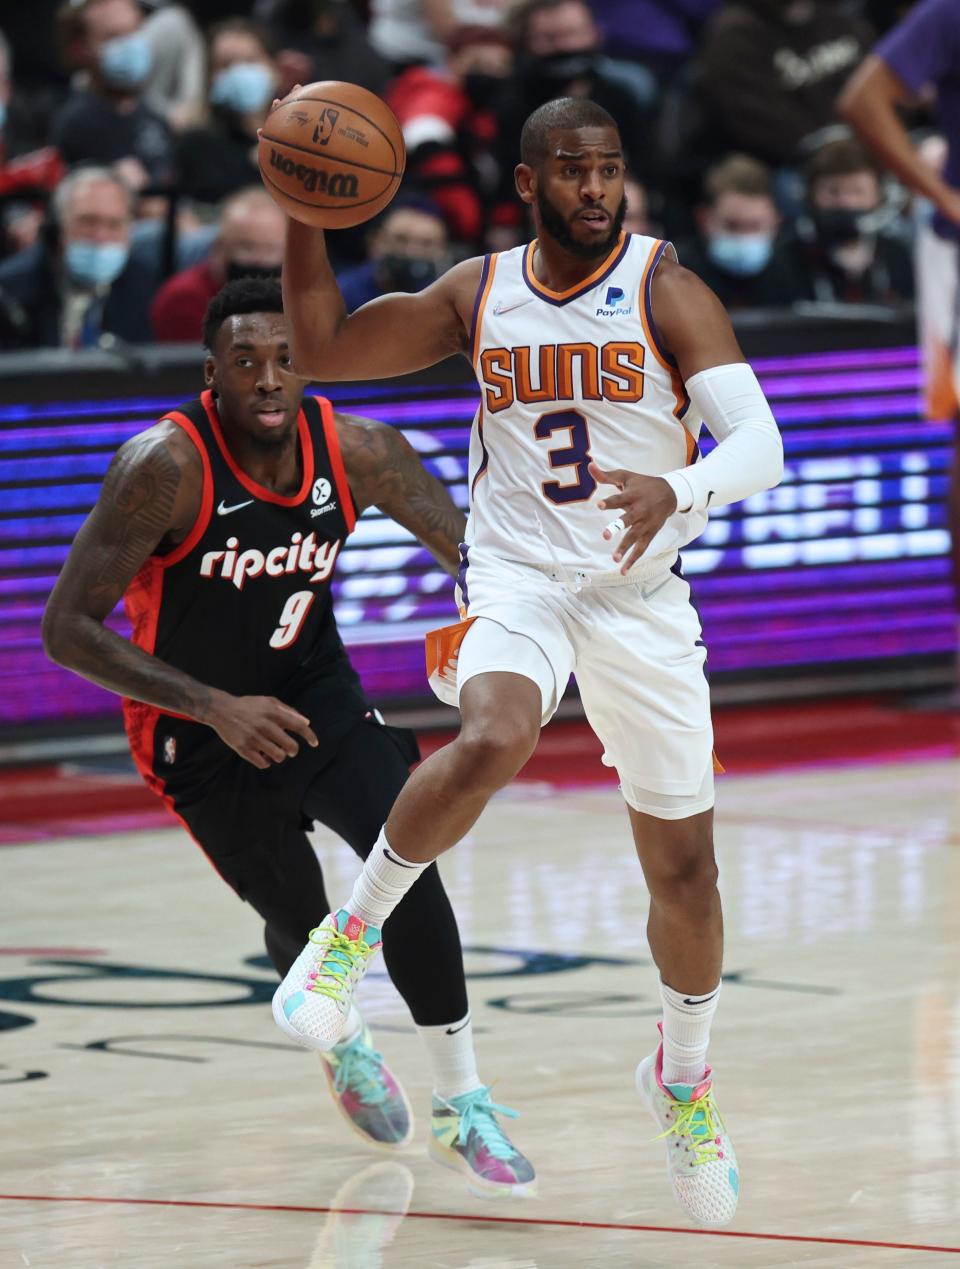 Phoenix Suns guard Chris Paul, right, passes the ball as Portland Trail Blazers forward Nassir Little, left, defends during the first half of an NBA basketball game in Portland, Ore., Tuesday, Dec. 14, 2021. (AP Photo/Steve Dipaola)